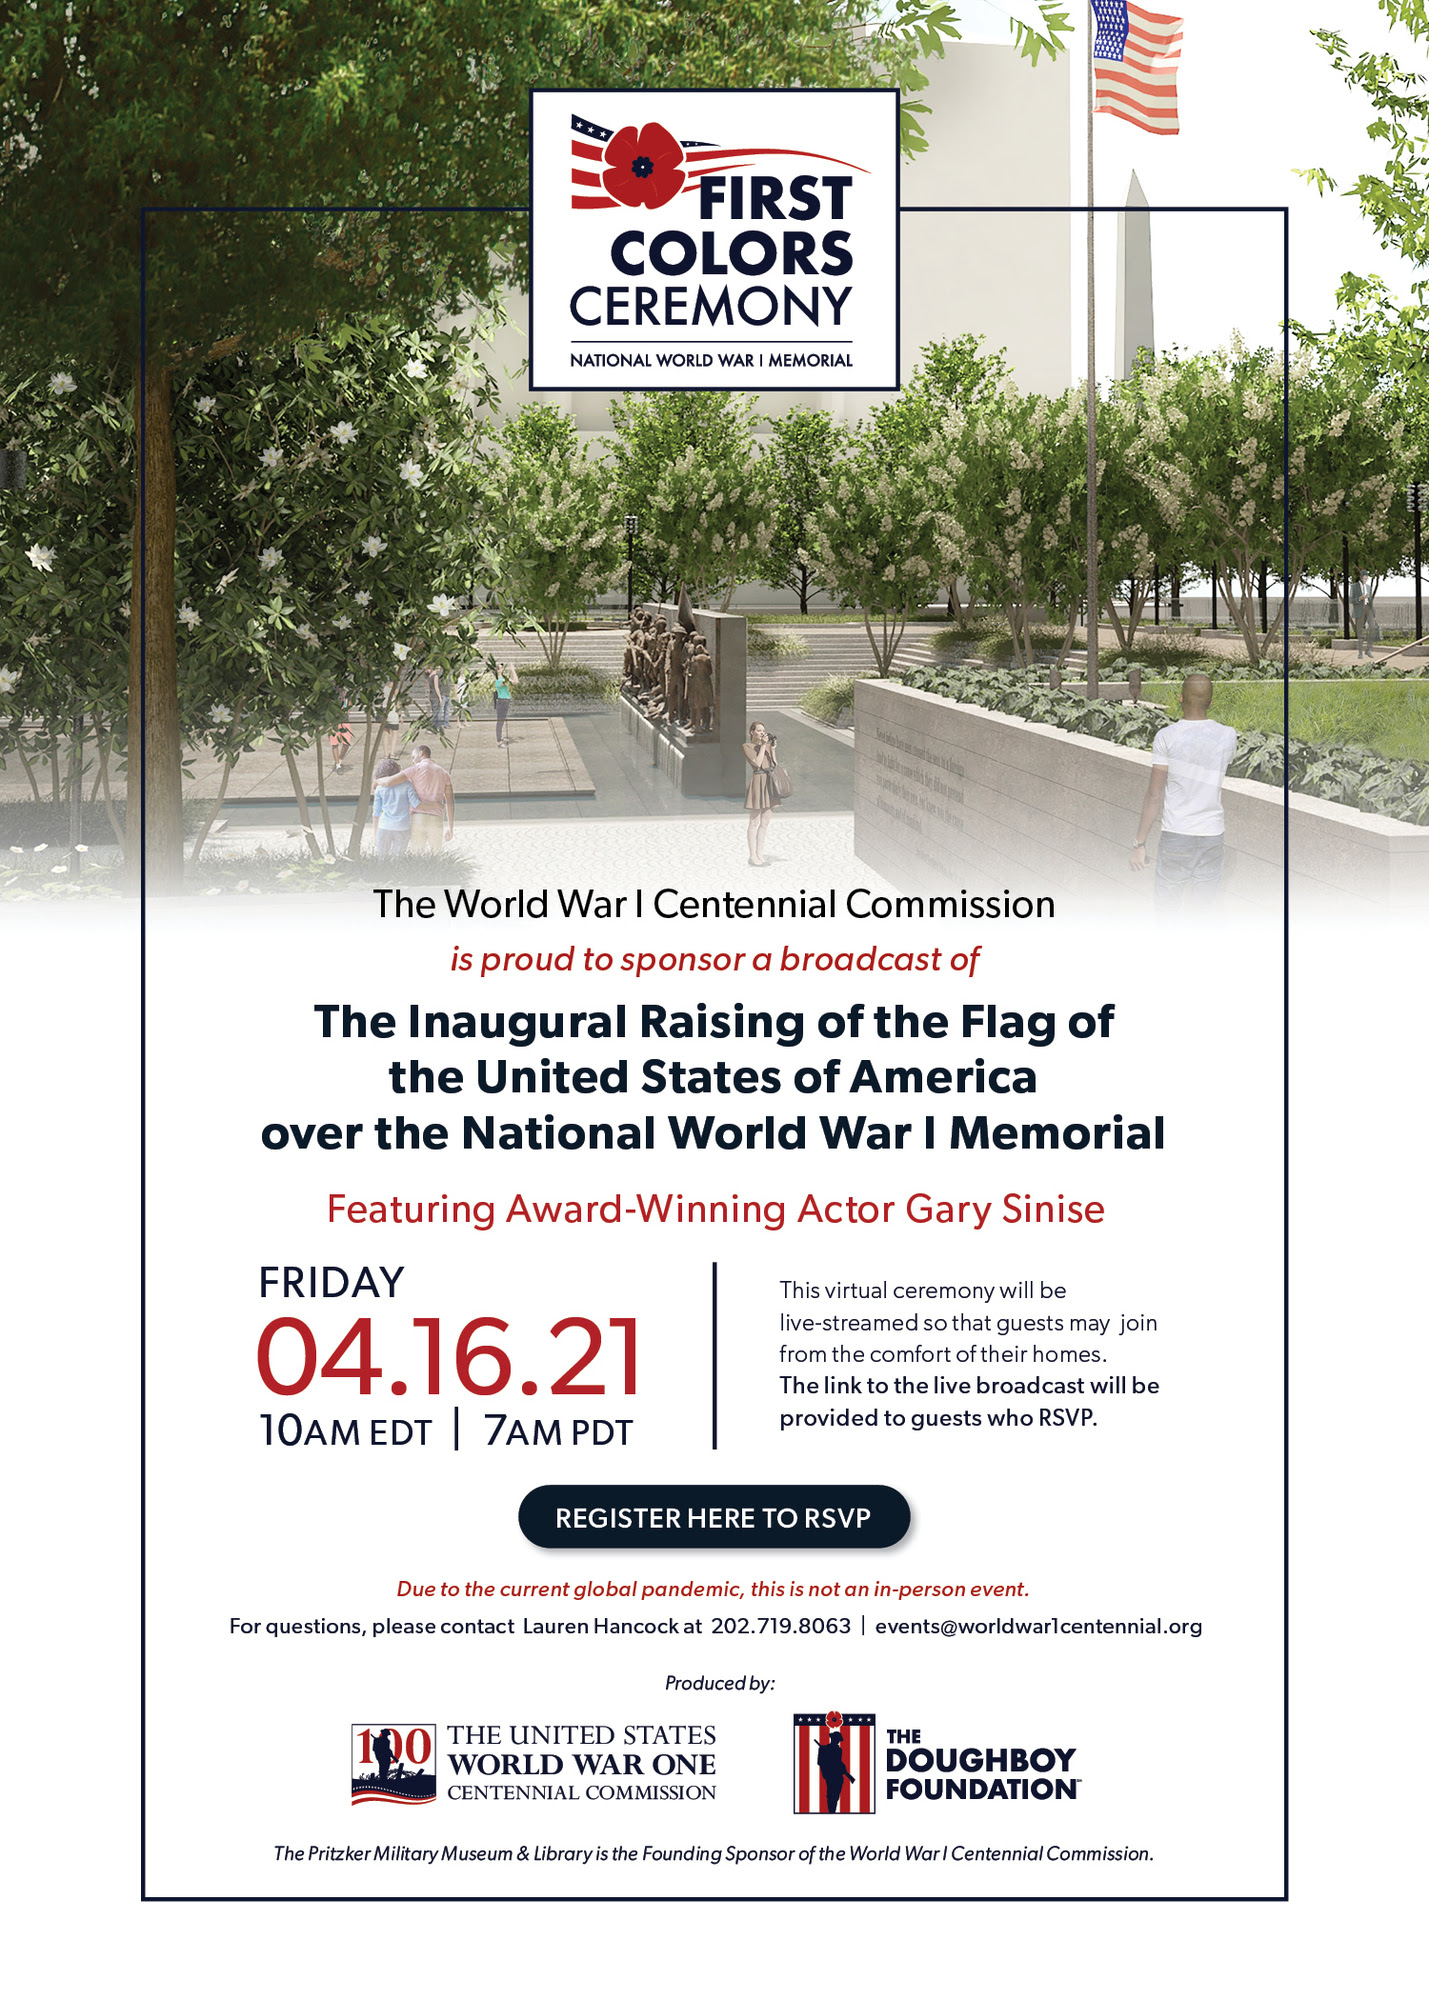 Invitation to the First Colors Ceremony on April 16, 2021 at 10am Eastern